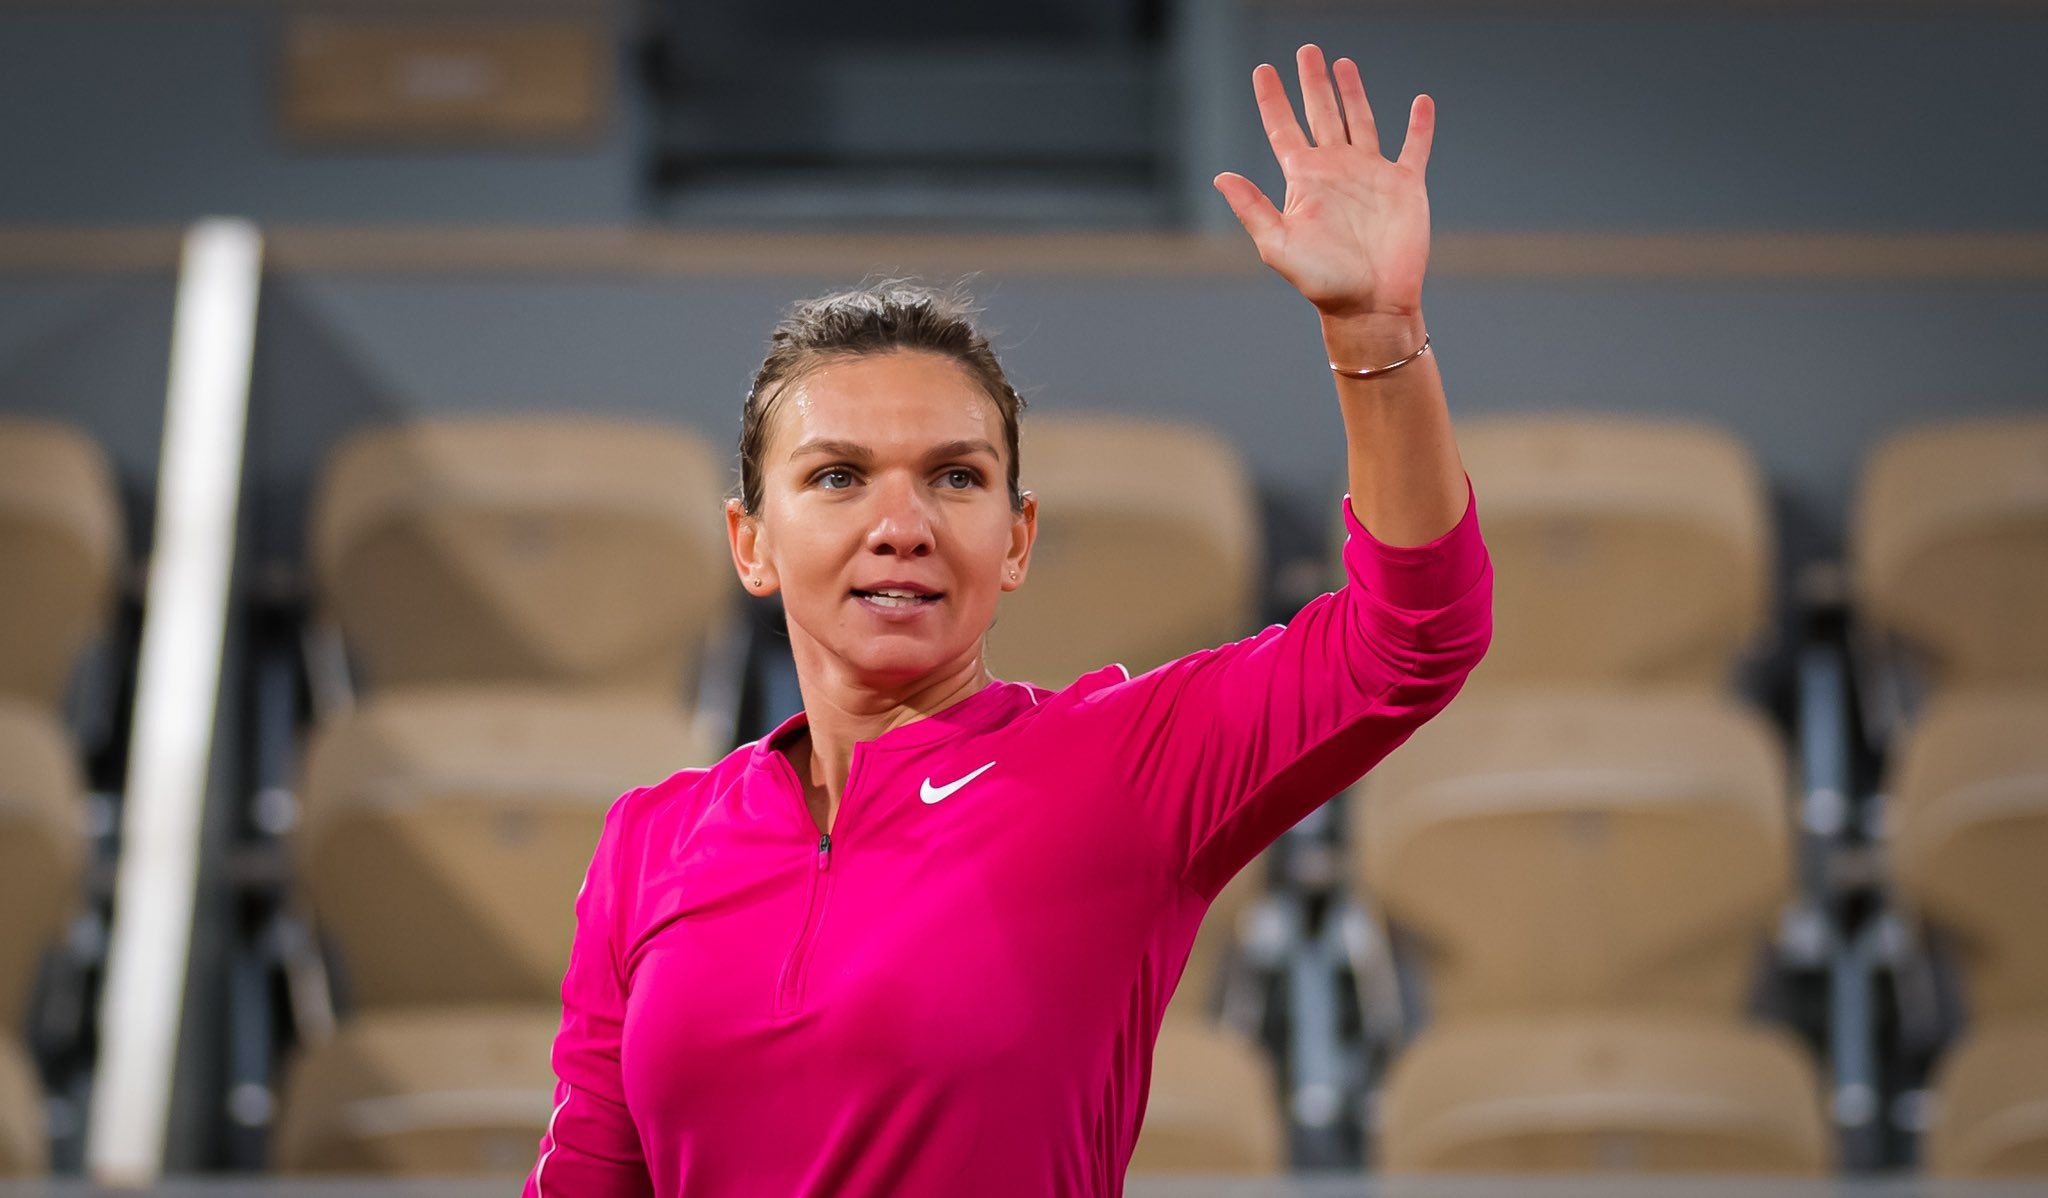 What is Roxadustat, substance Simona Halep is accused of having taken?